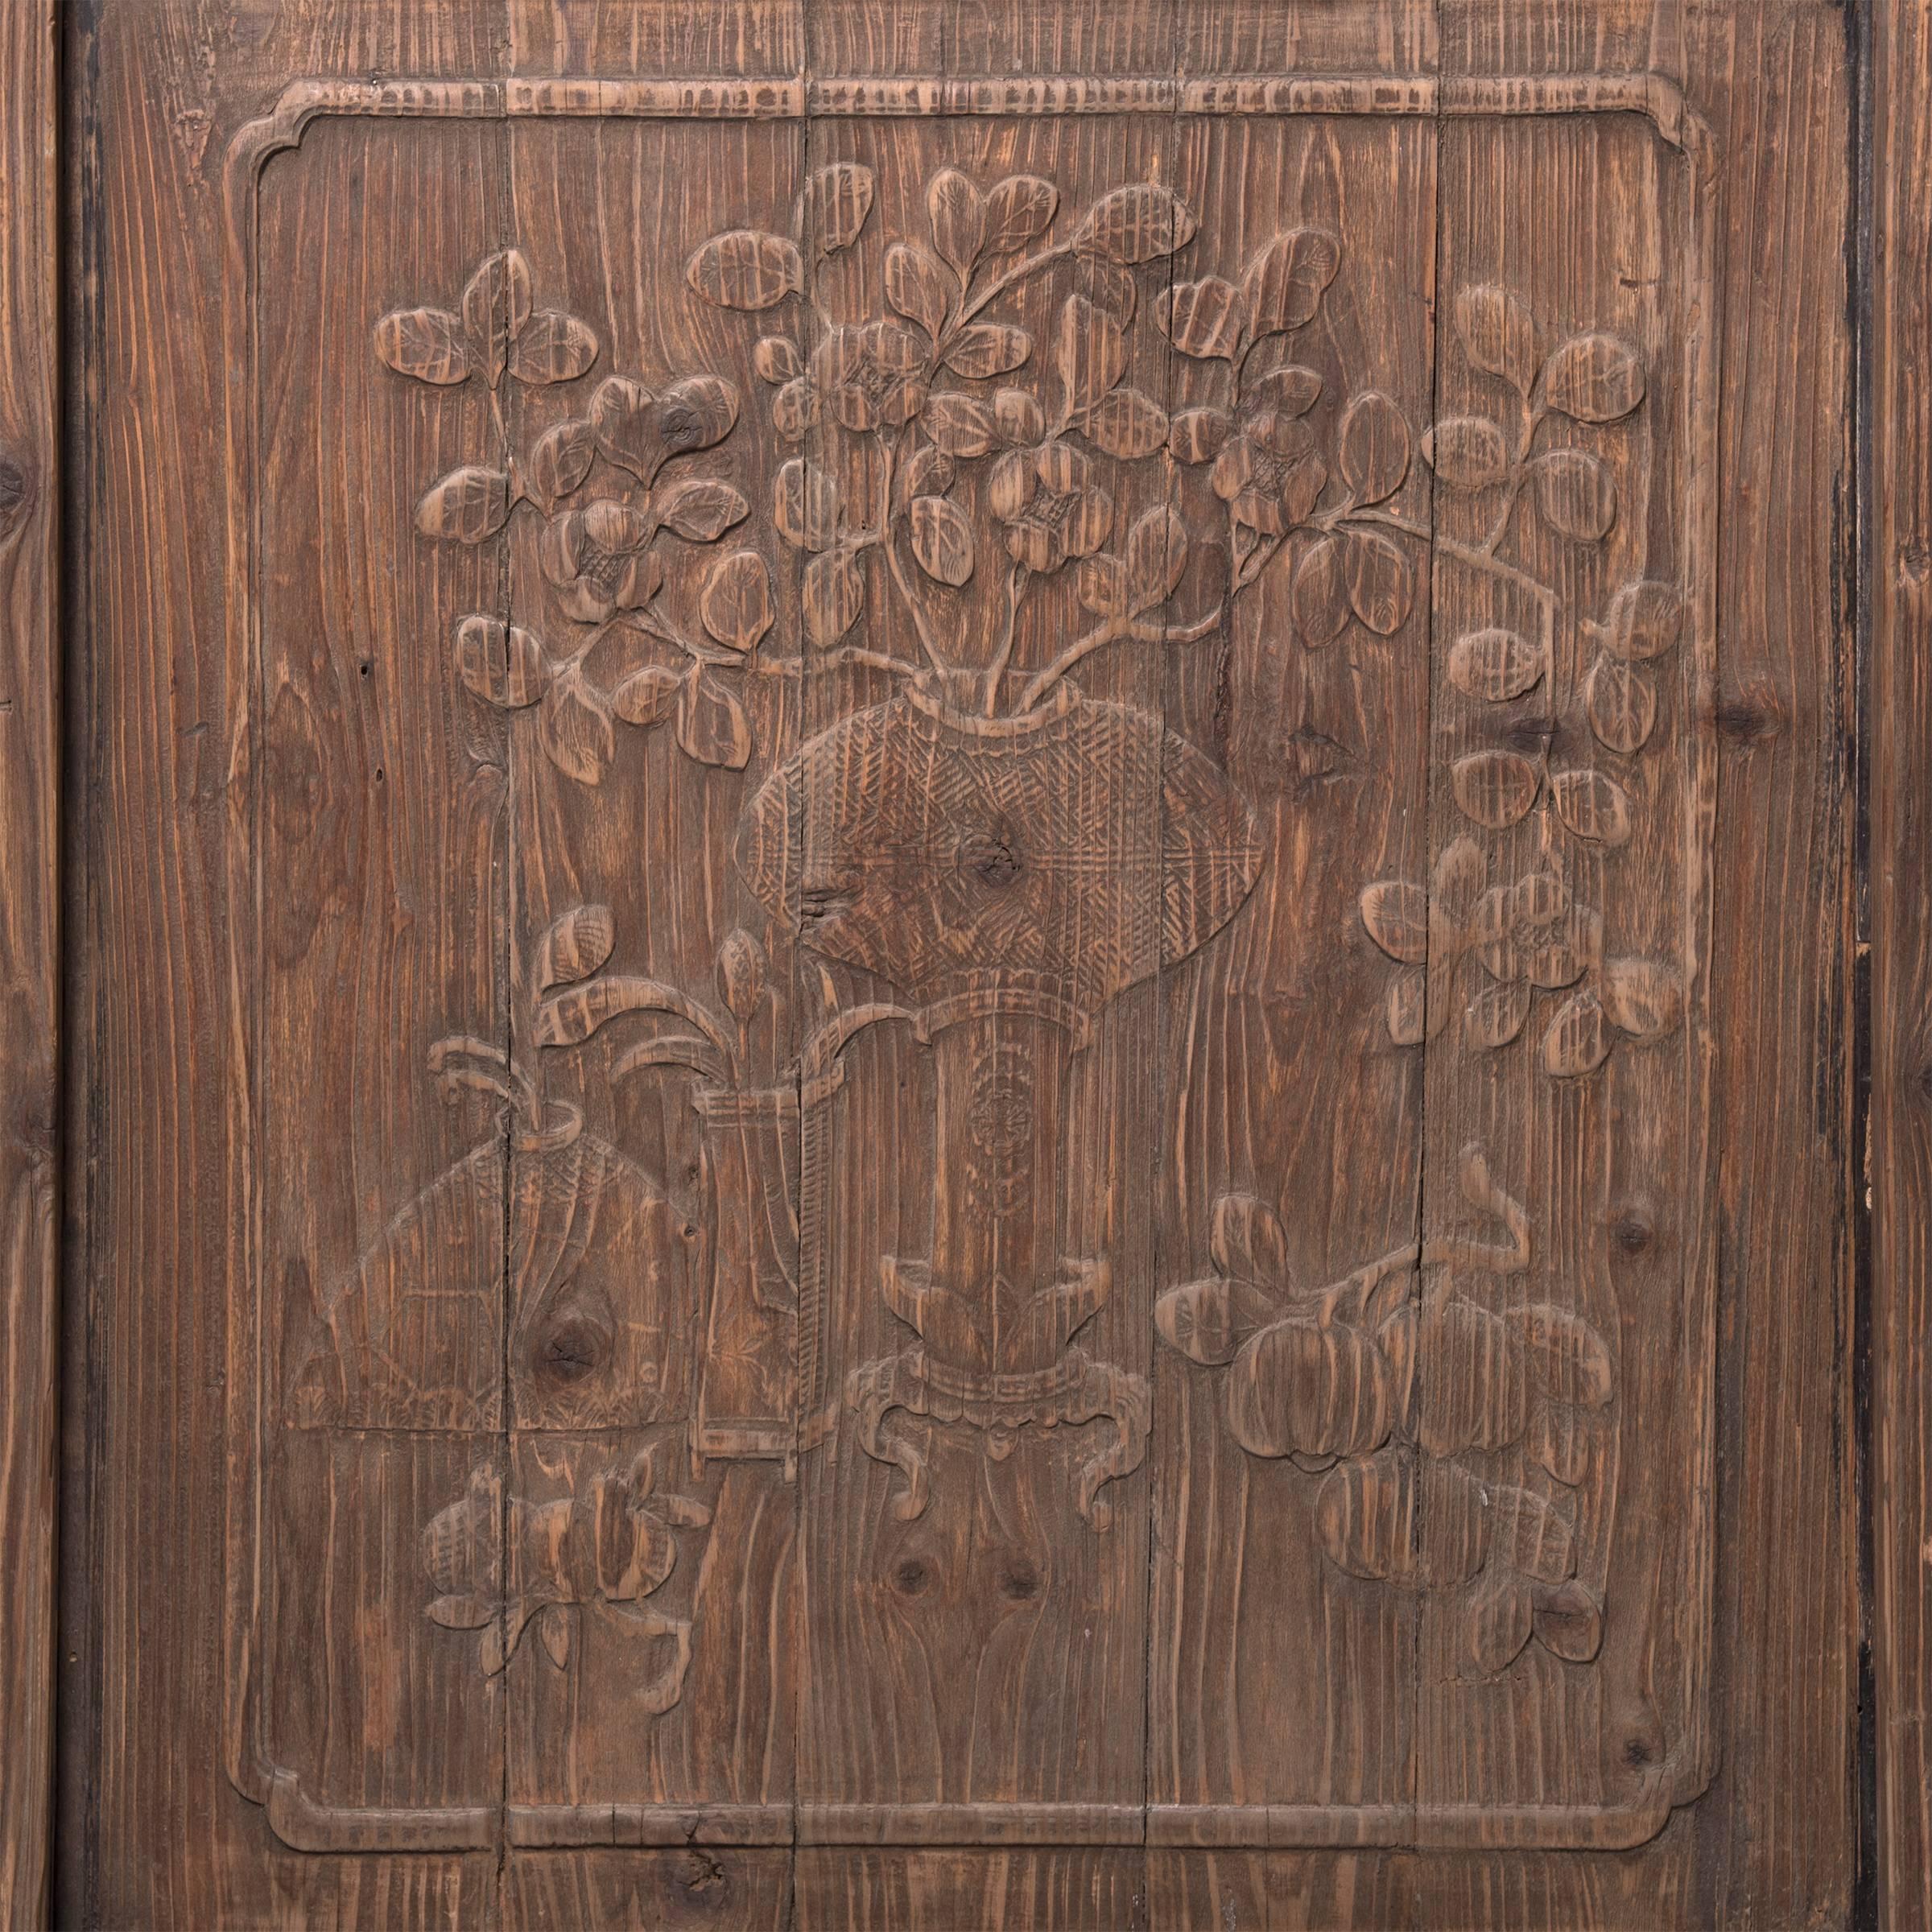 Qing Chinese Relief Carved Architectural Panel with Fruit and Flora, c. 1850 For Sale